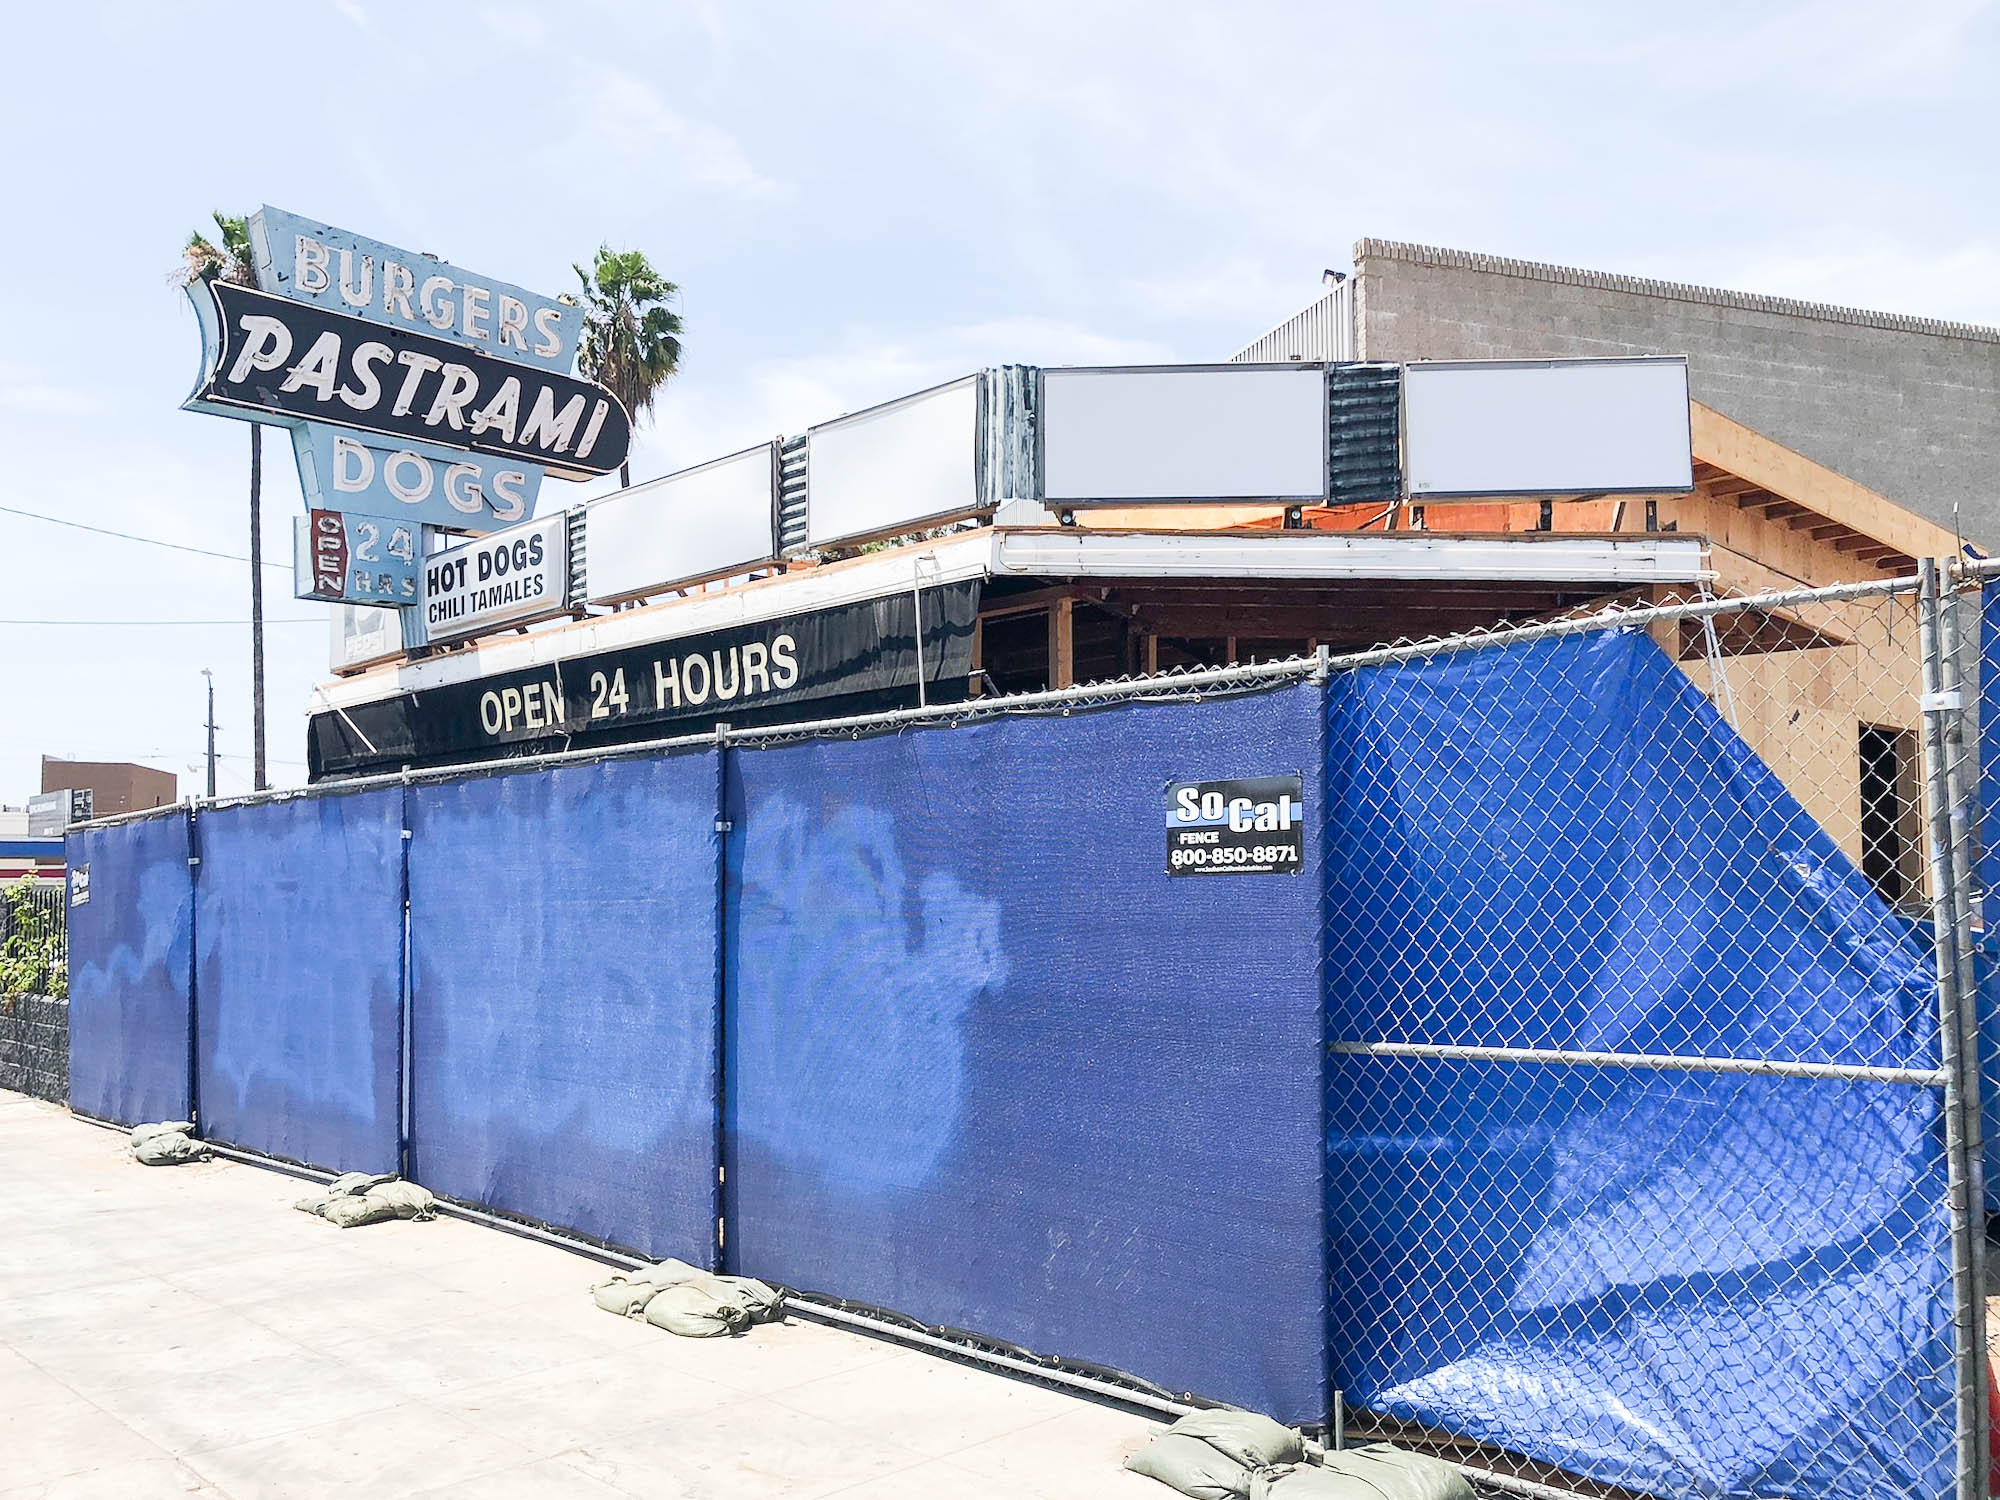 The old facade for Johnny’s Pastrami in West Adams, Los Angeles.